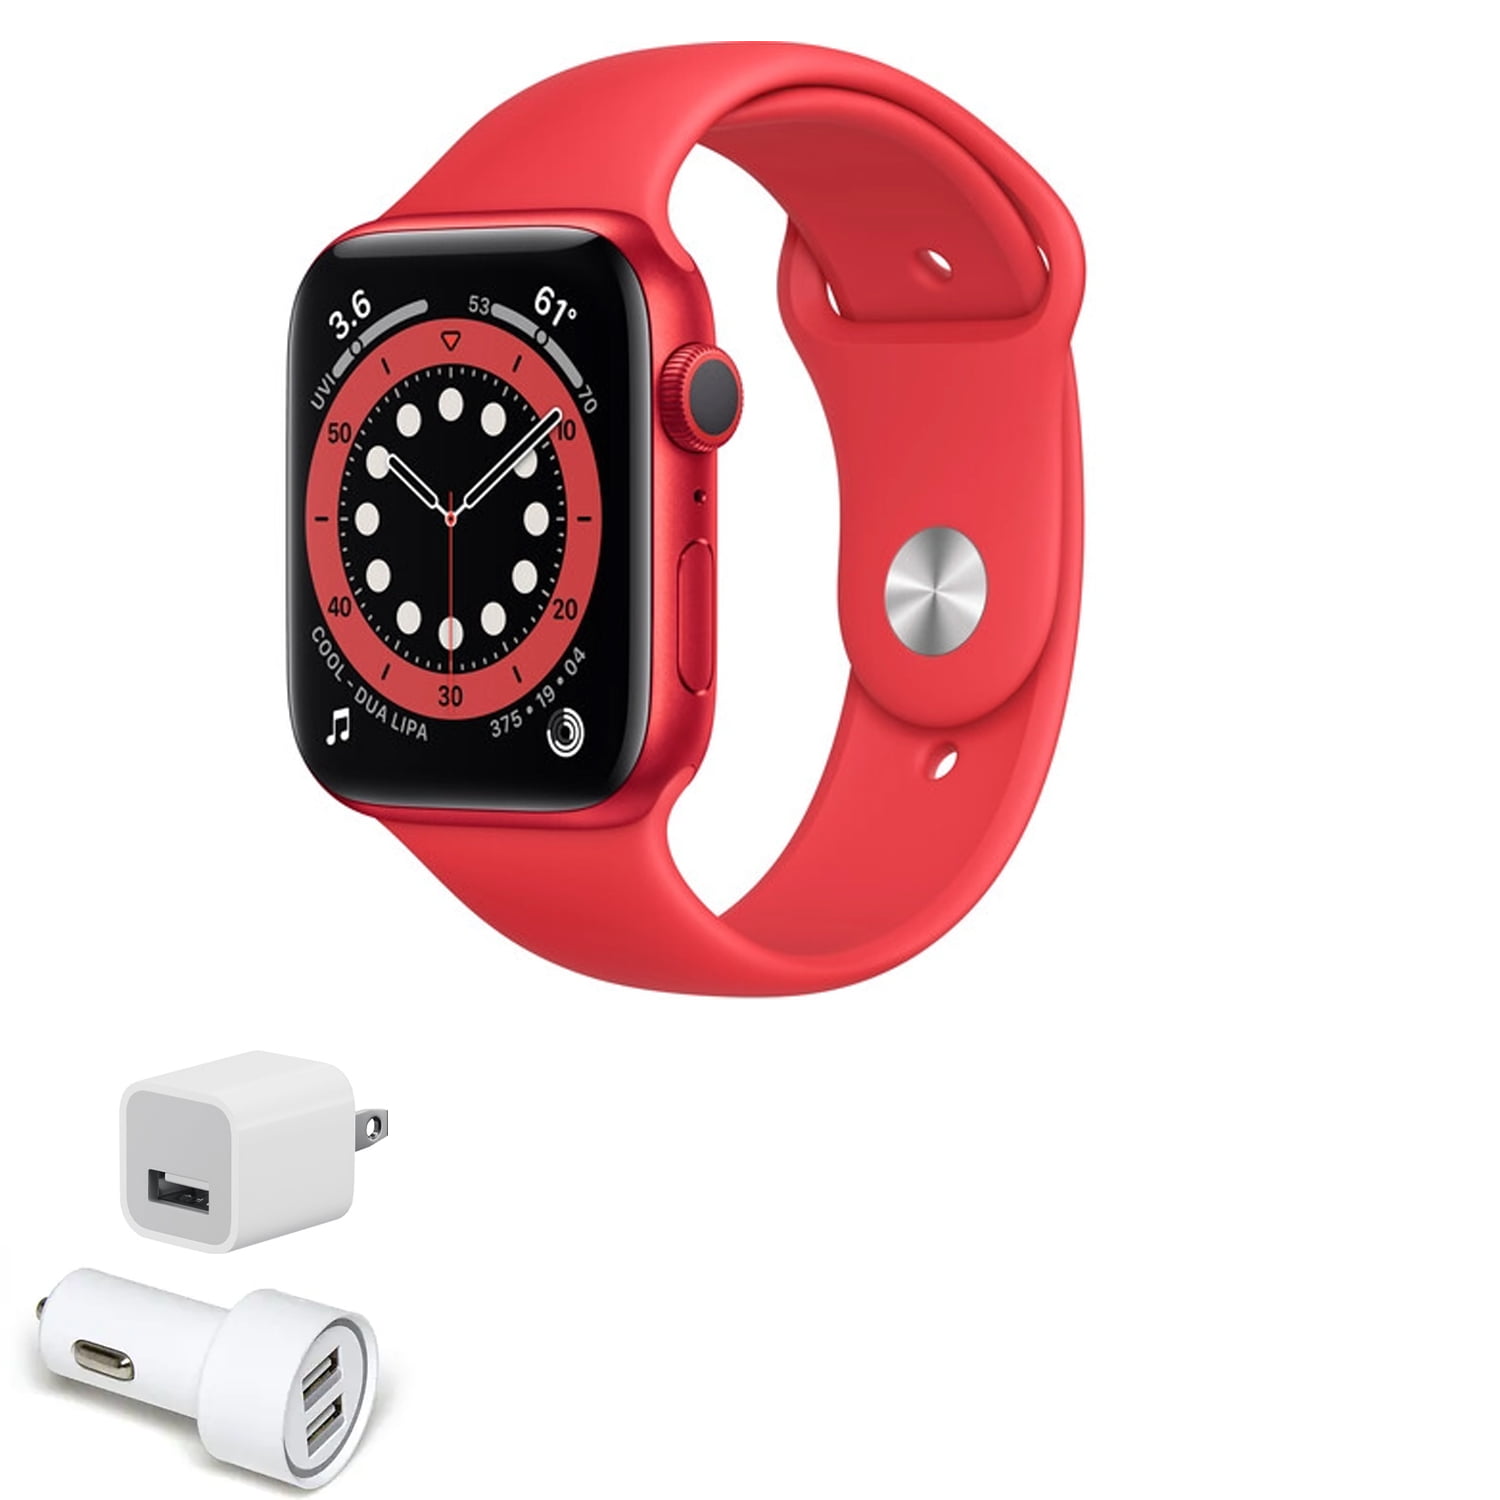 Apple Watch Series 6 (GPS, 44mm, PRODUCT(RED) Aluminum, PRODUCT